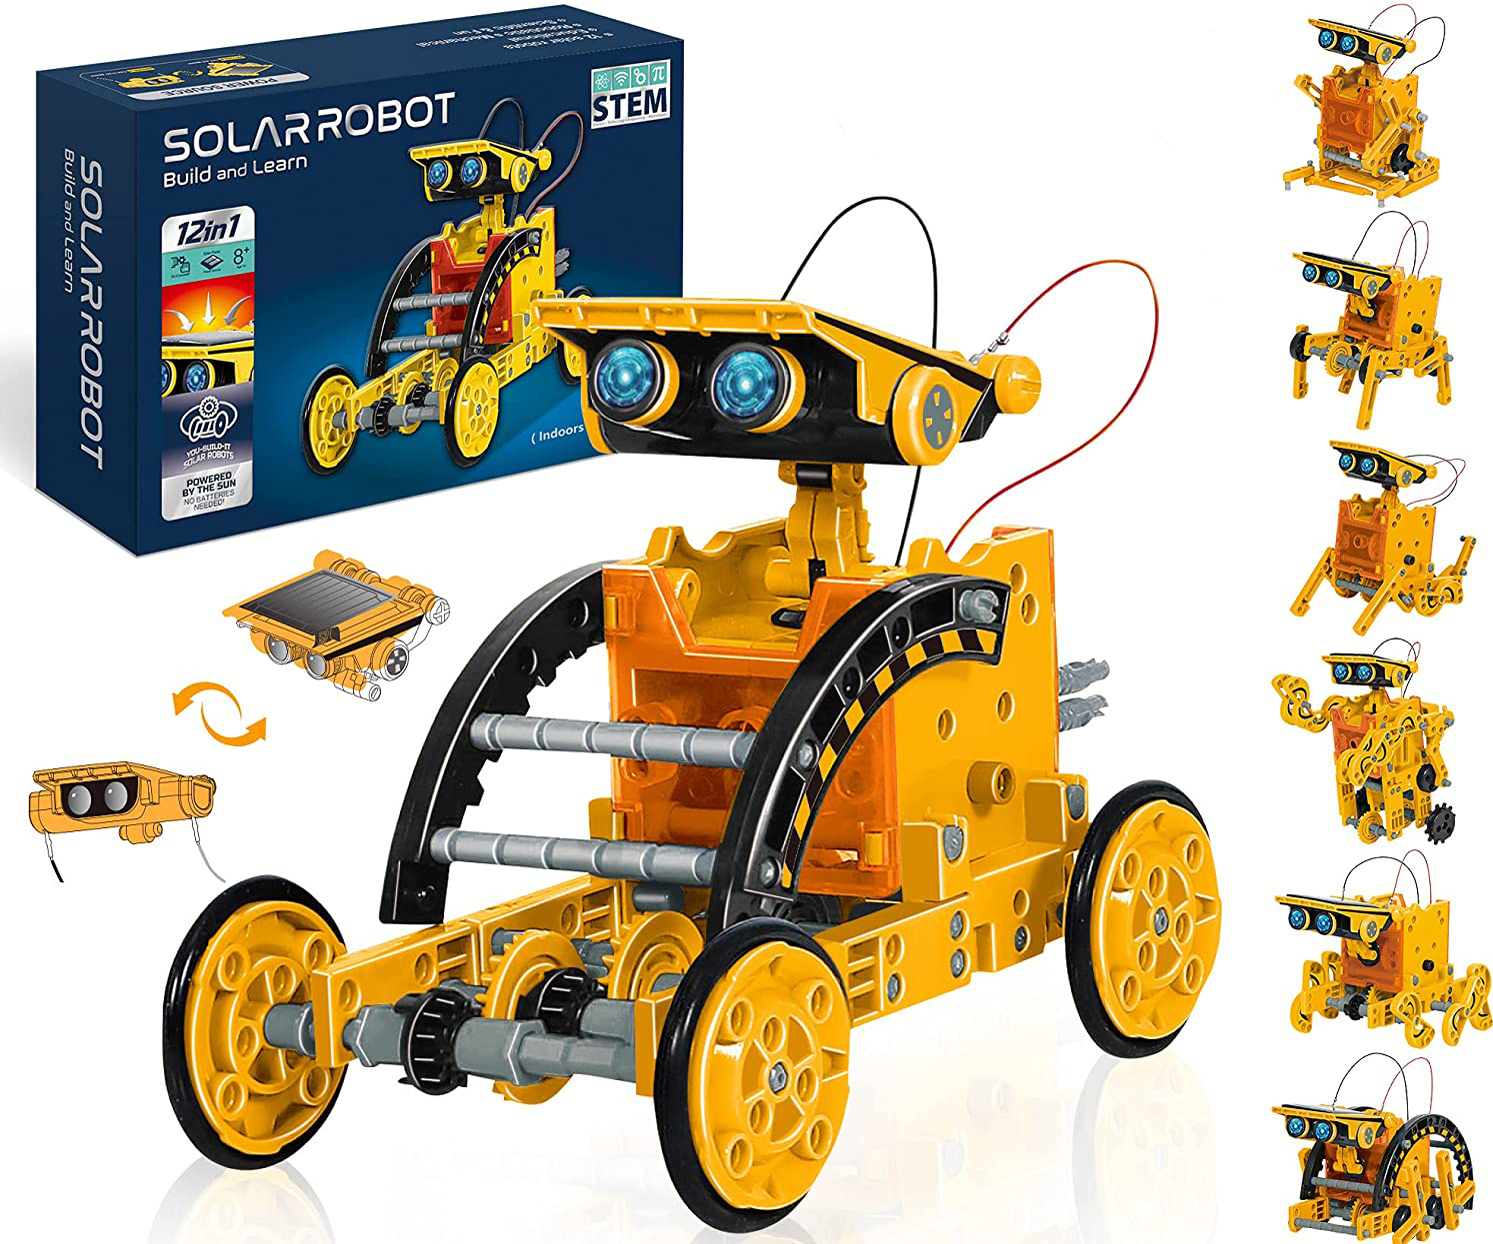 Solar Robot Kits gifts for Boys OASO STEM projects Robot Building Kits for Kids 